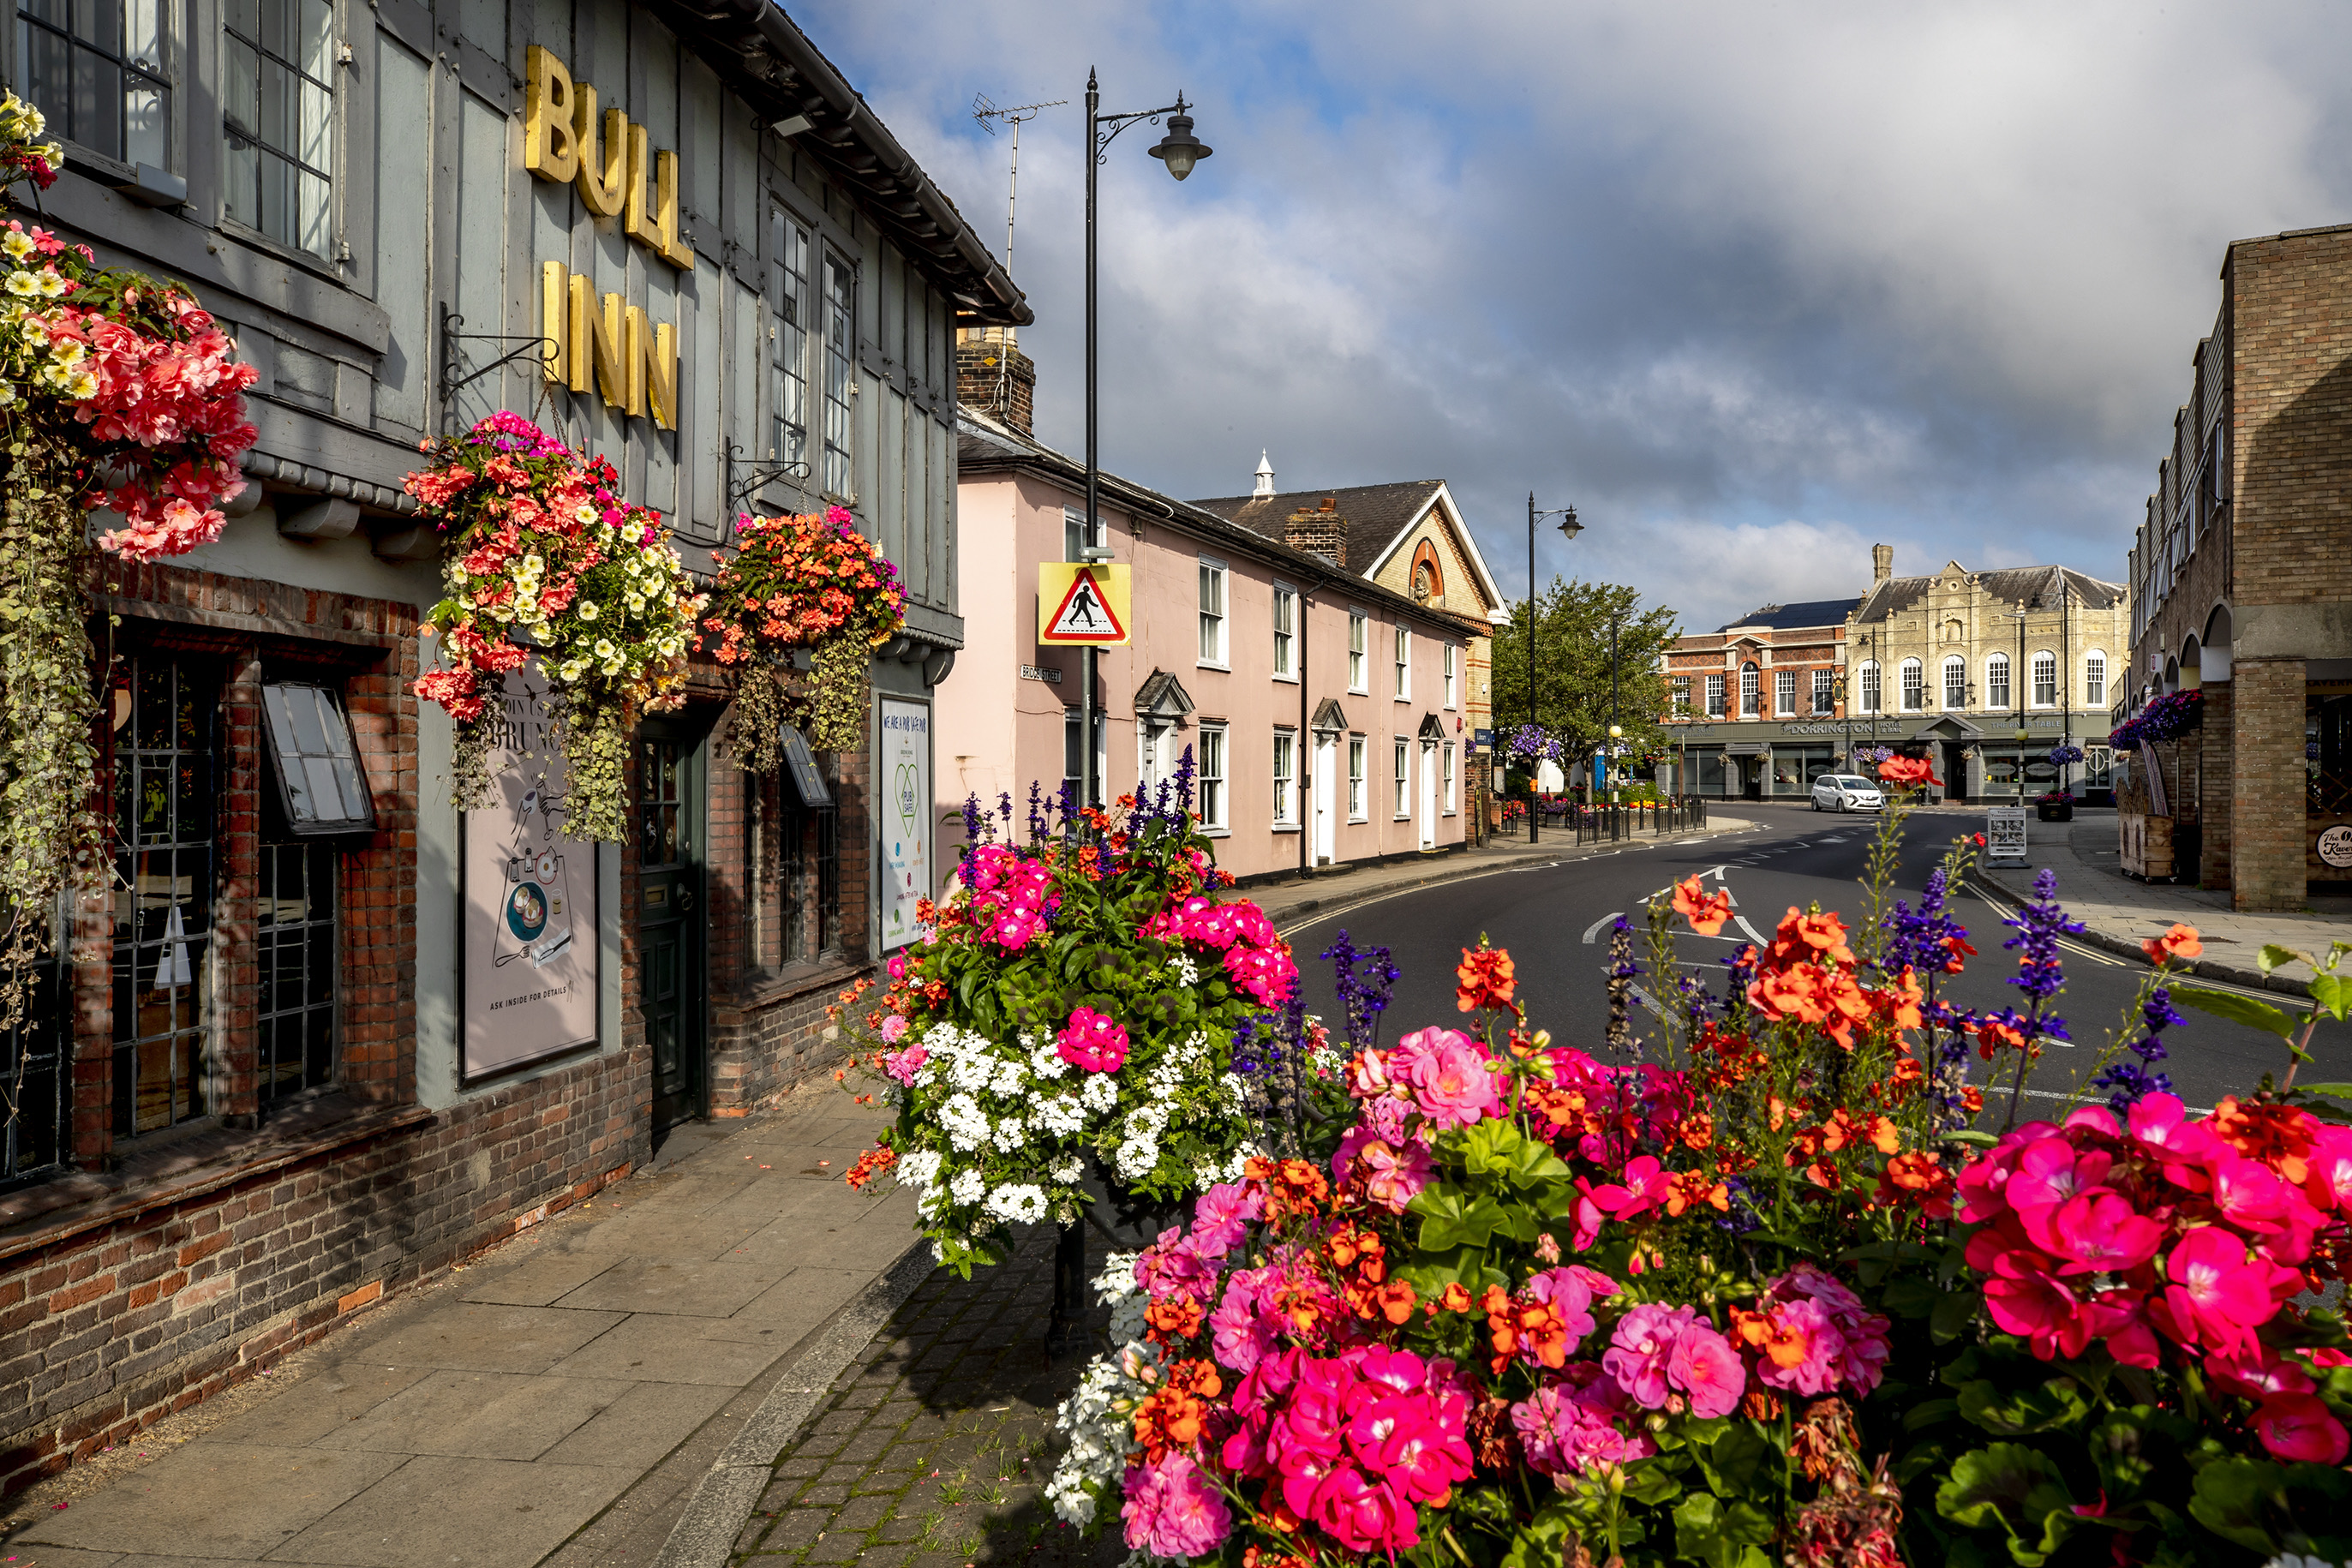 A photo of a road with flowers and buildings - Image